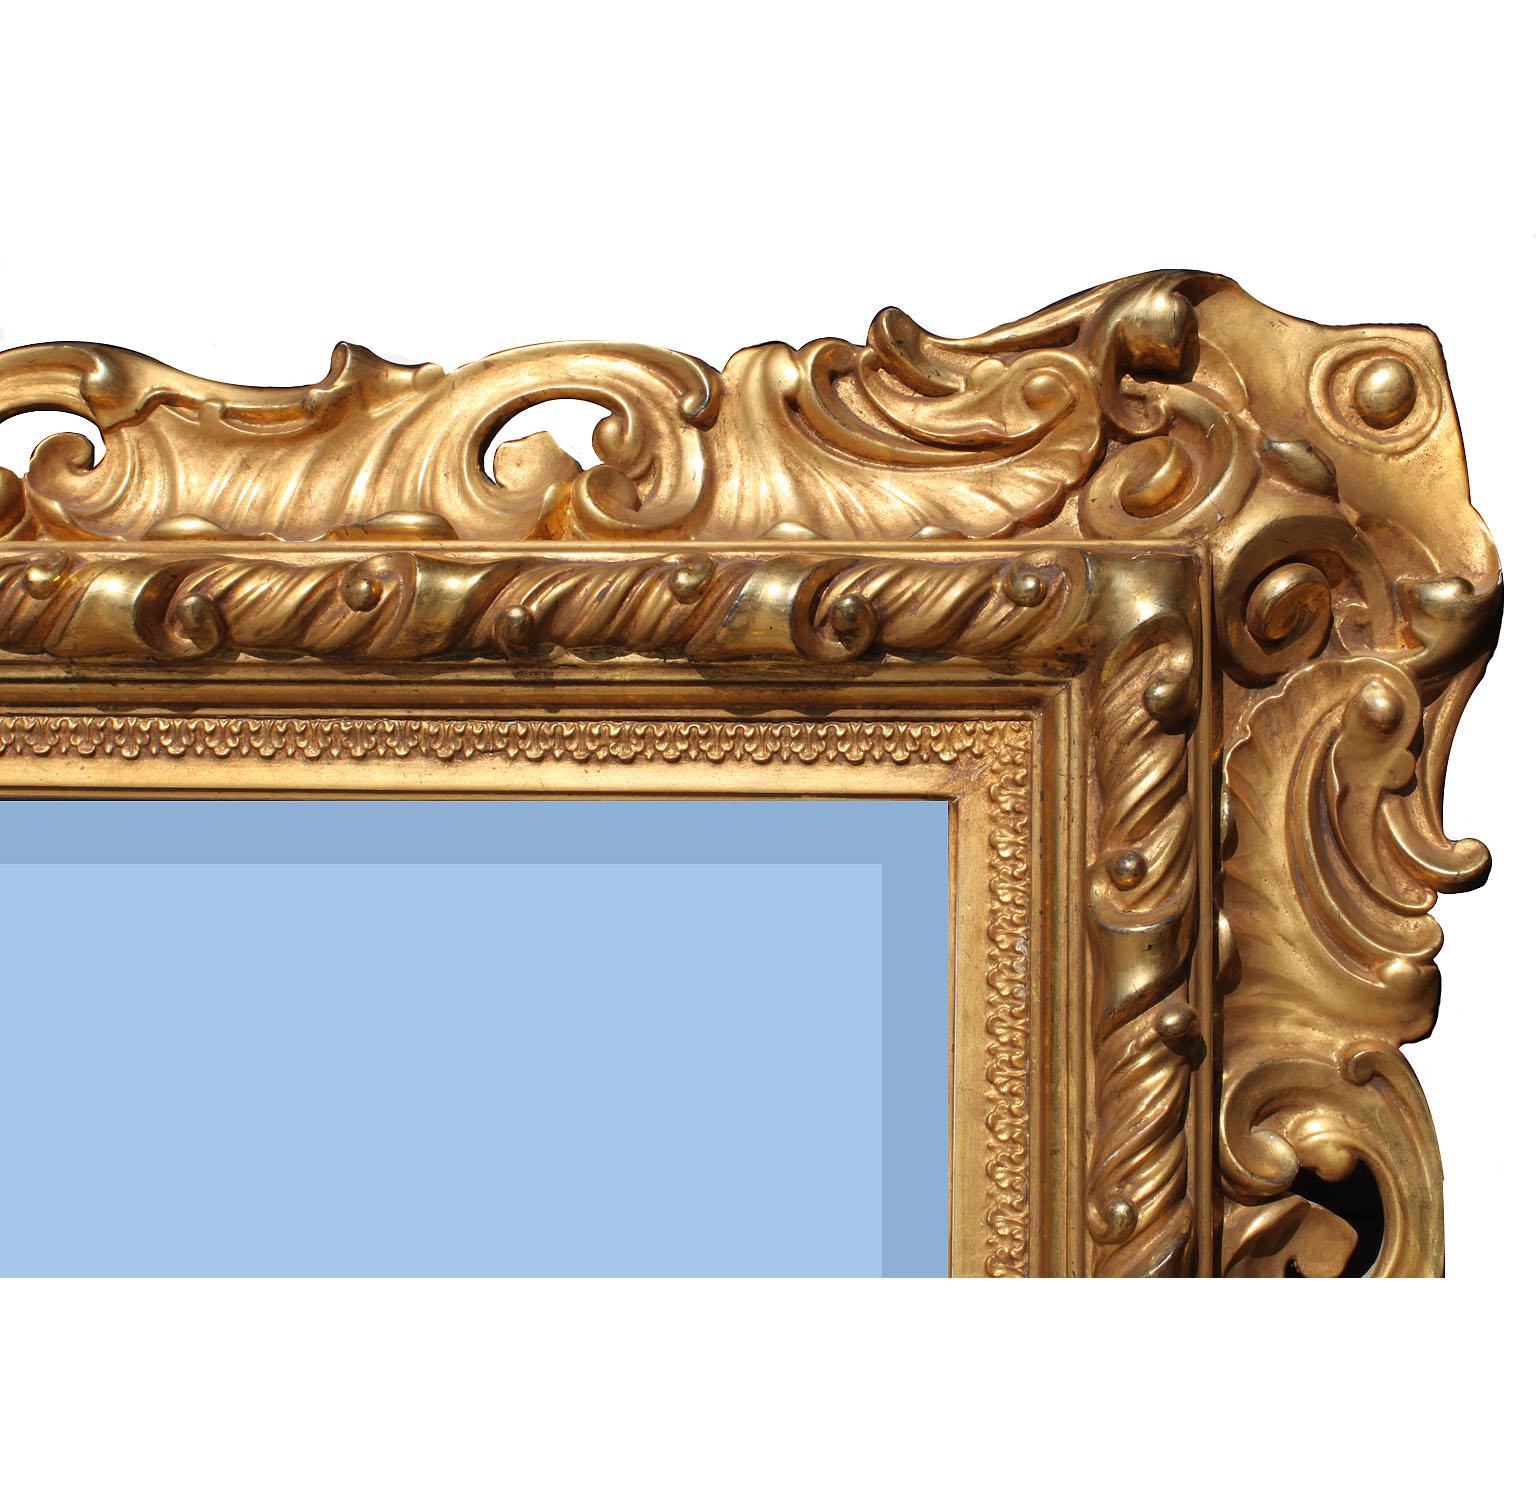 A fine and large and impressive Italian 19th century Baroque Revival style giltwood carved mirror frame. The ornately carved rectangular shaped frame, with floral, scrolled and shell carved frame, which can be hanged either vertically or